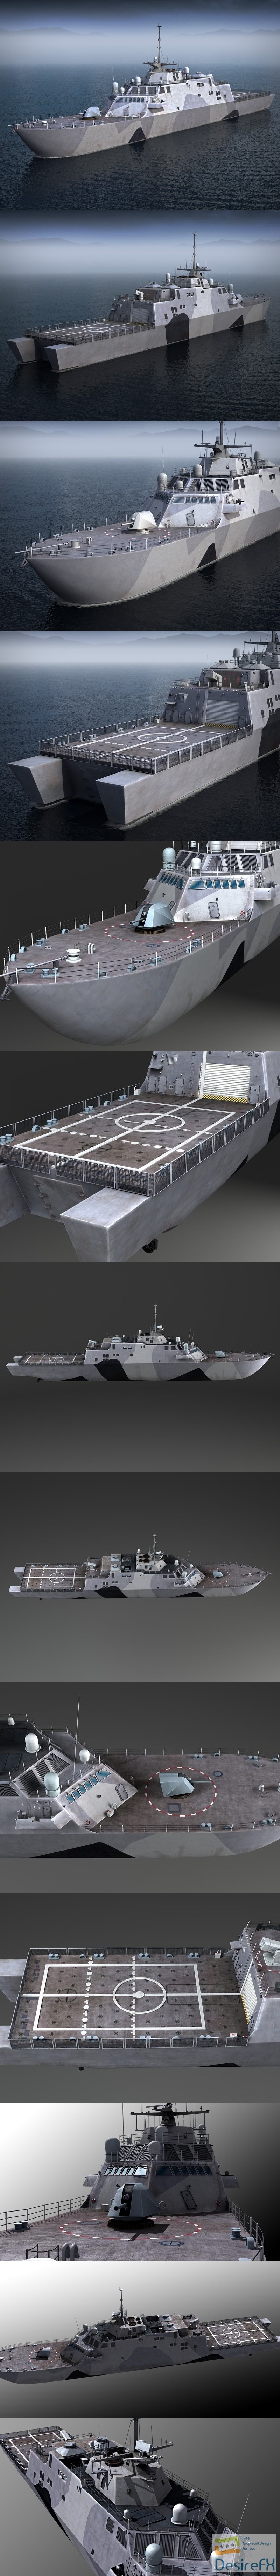 USS Independence LCS-1 3D Model